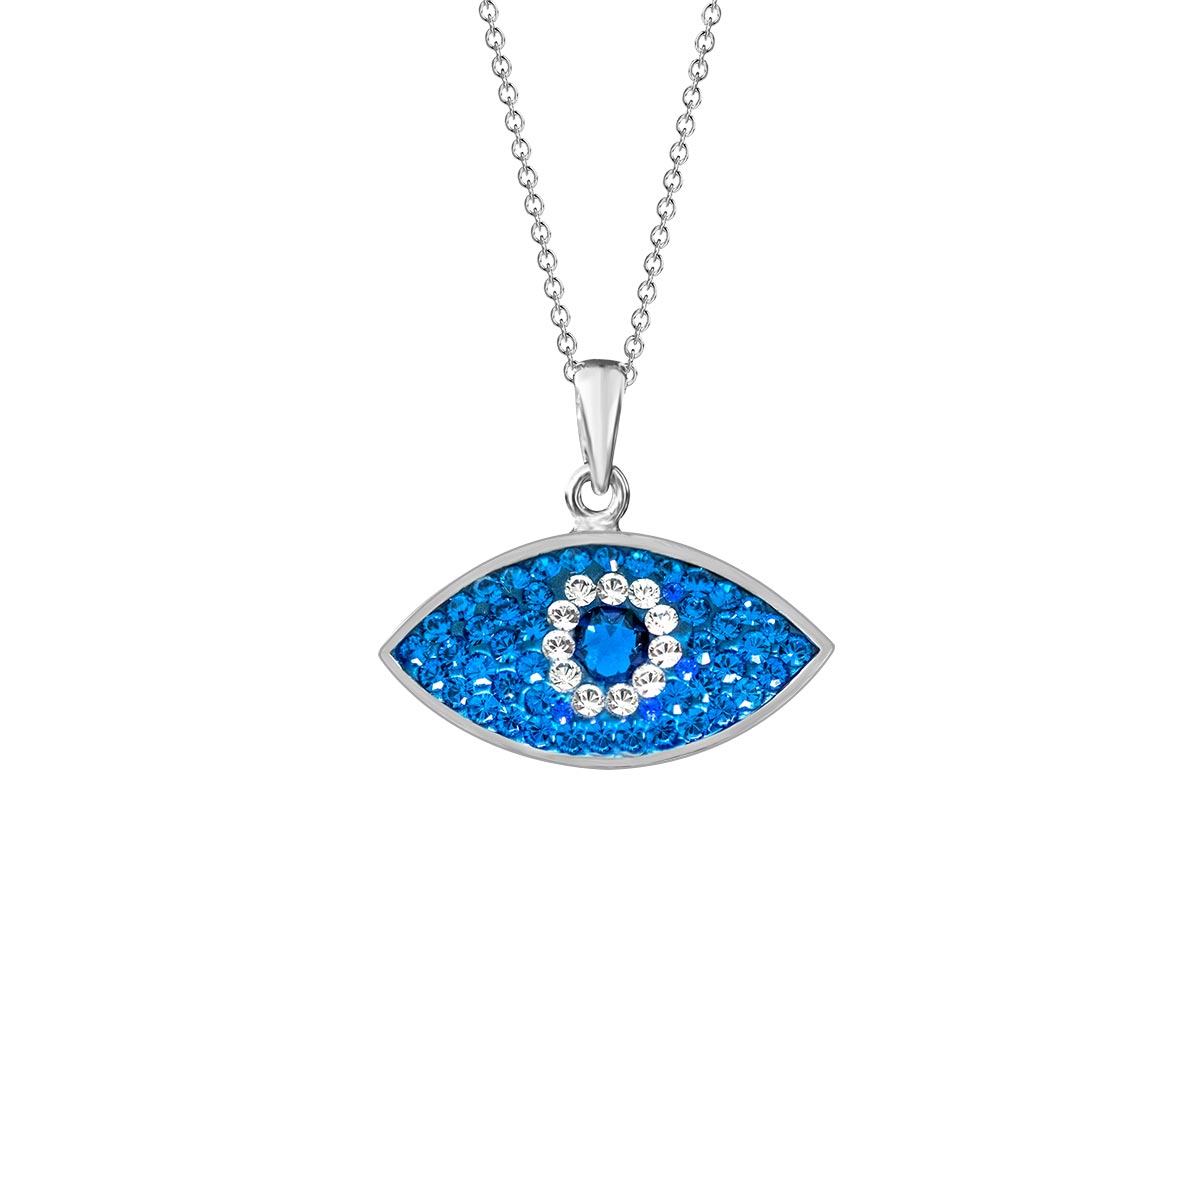 Buy Swarovski Crystal Luckily Evil Eye Necklace 5411141 Necklace at Best  Prices on Lucknow Duty Free - Adani one